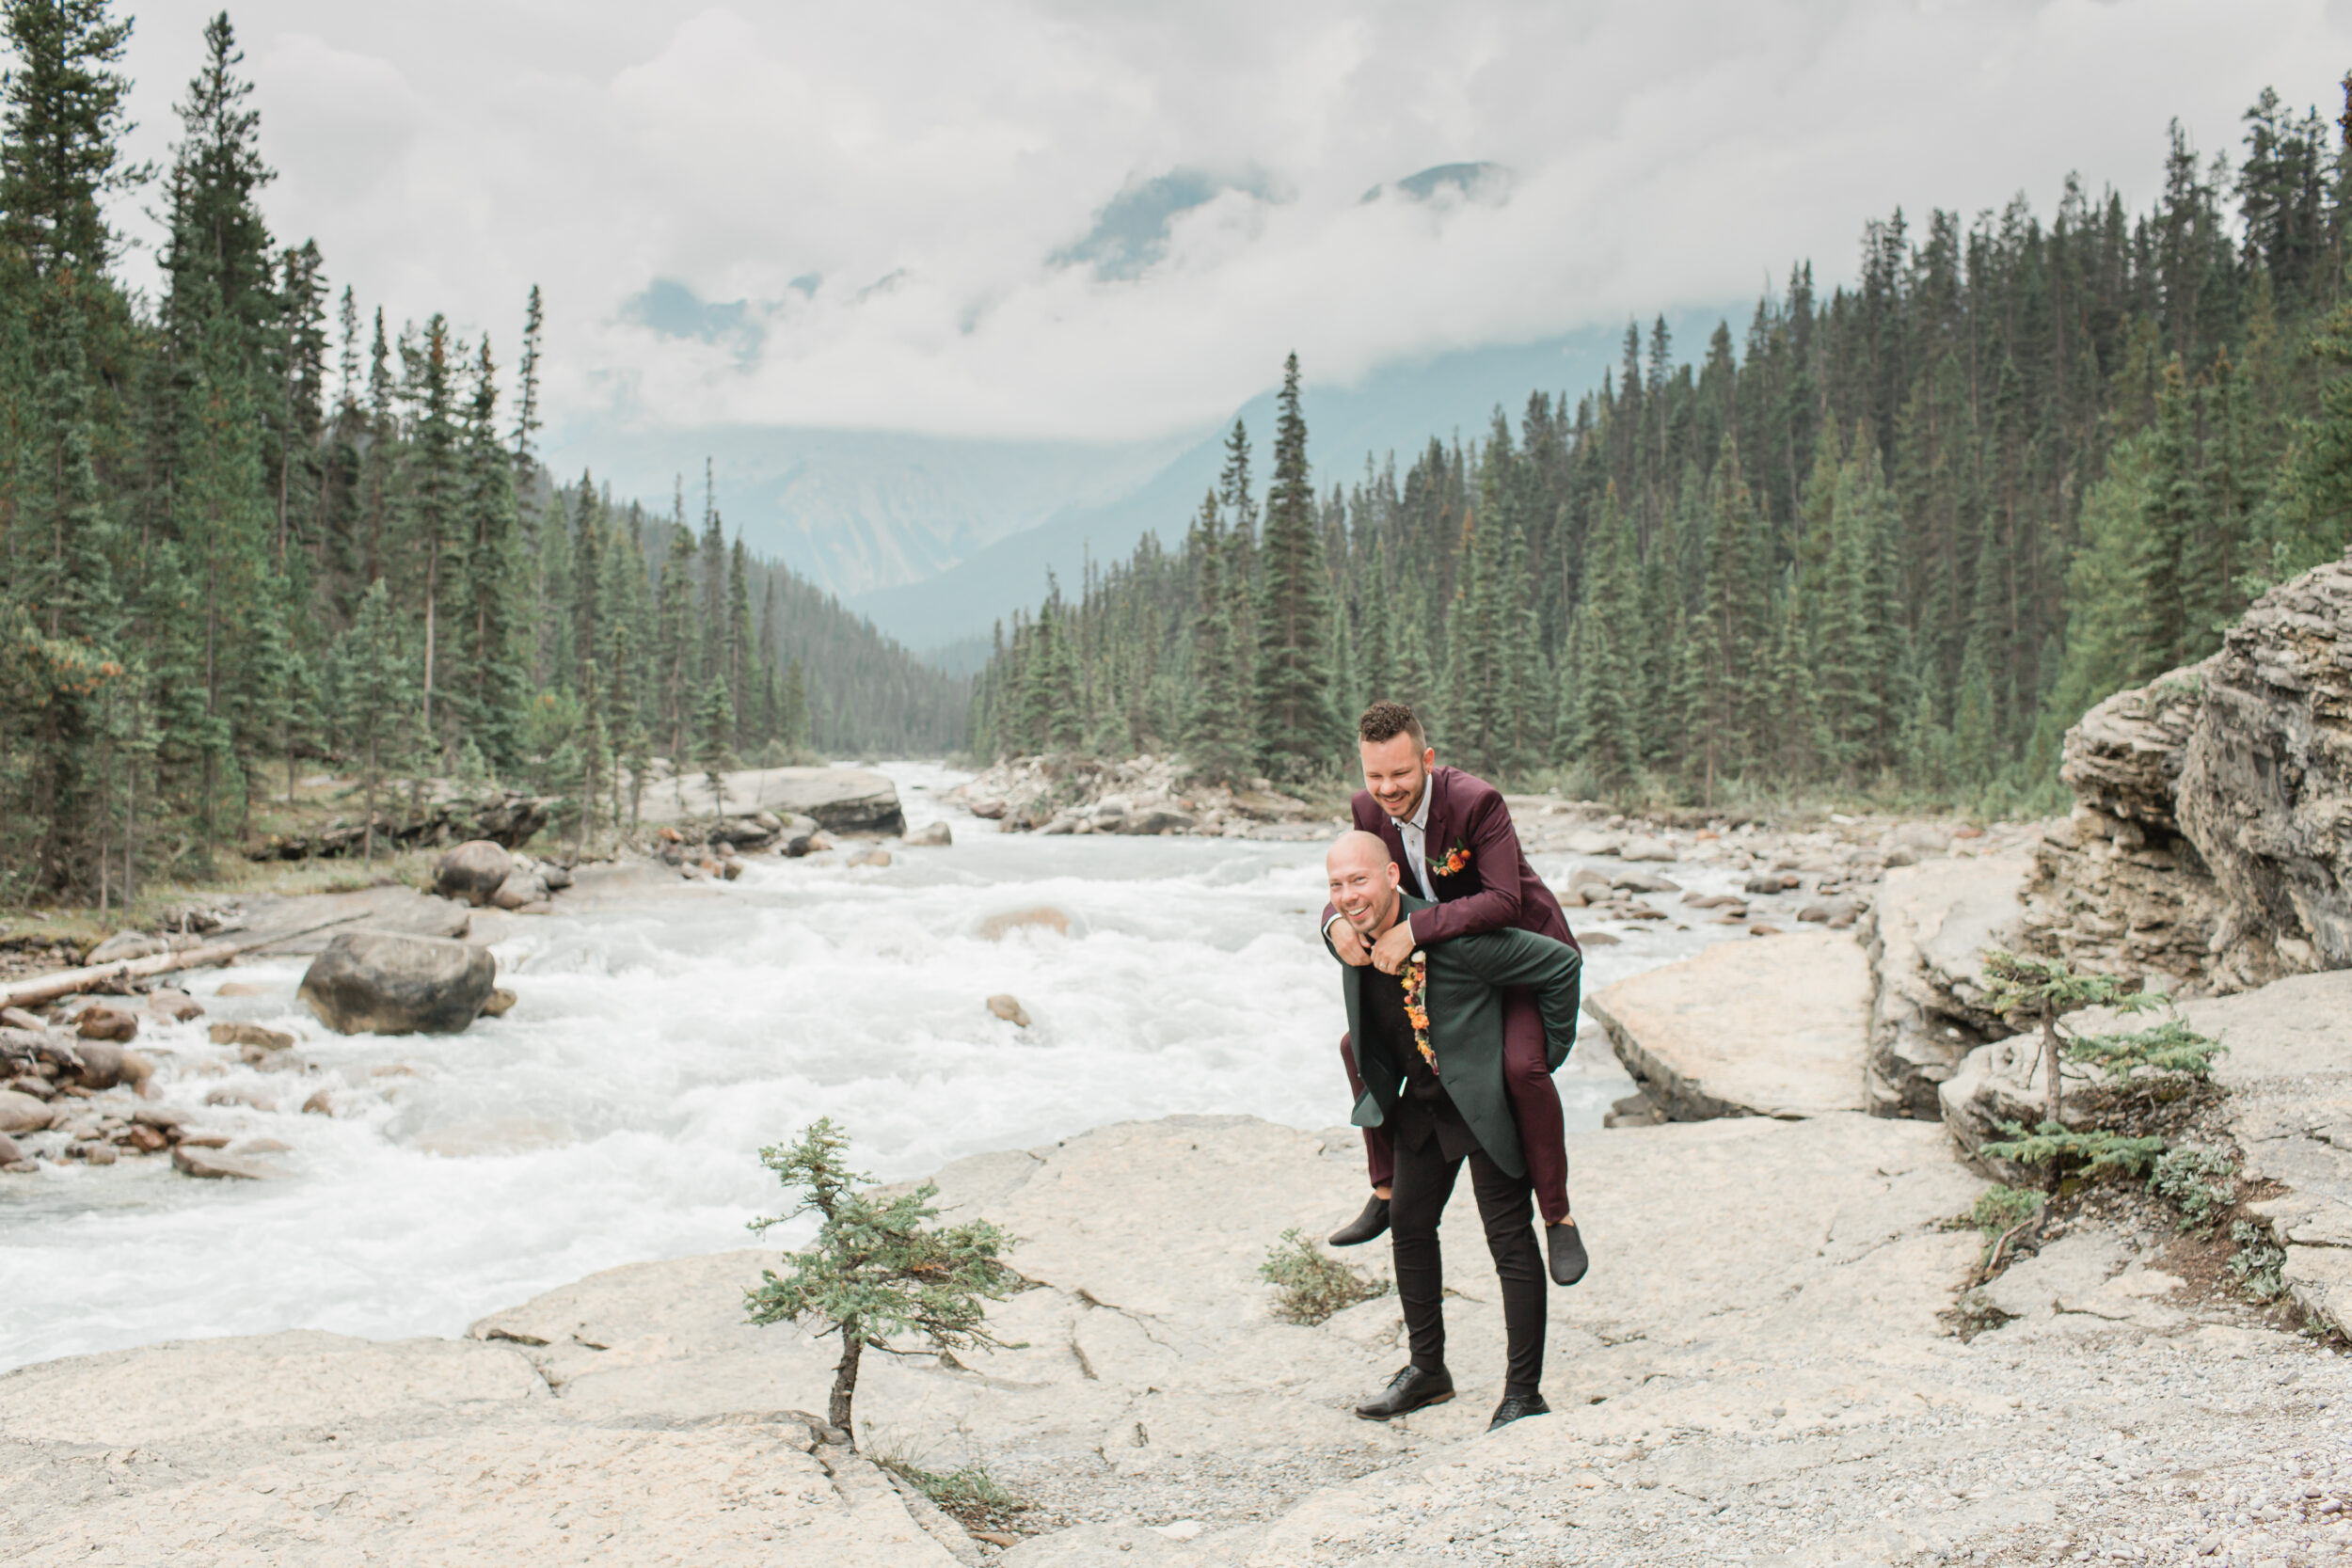 A couple shares a laugh after eloping in Banff National Park.